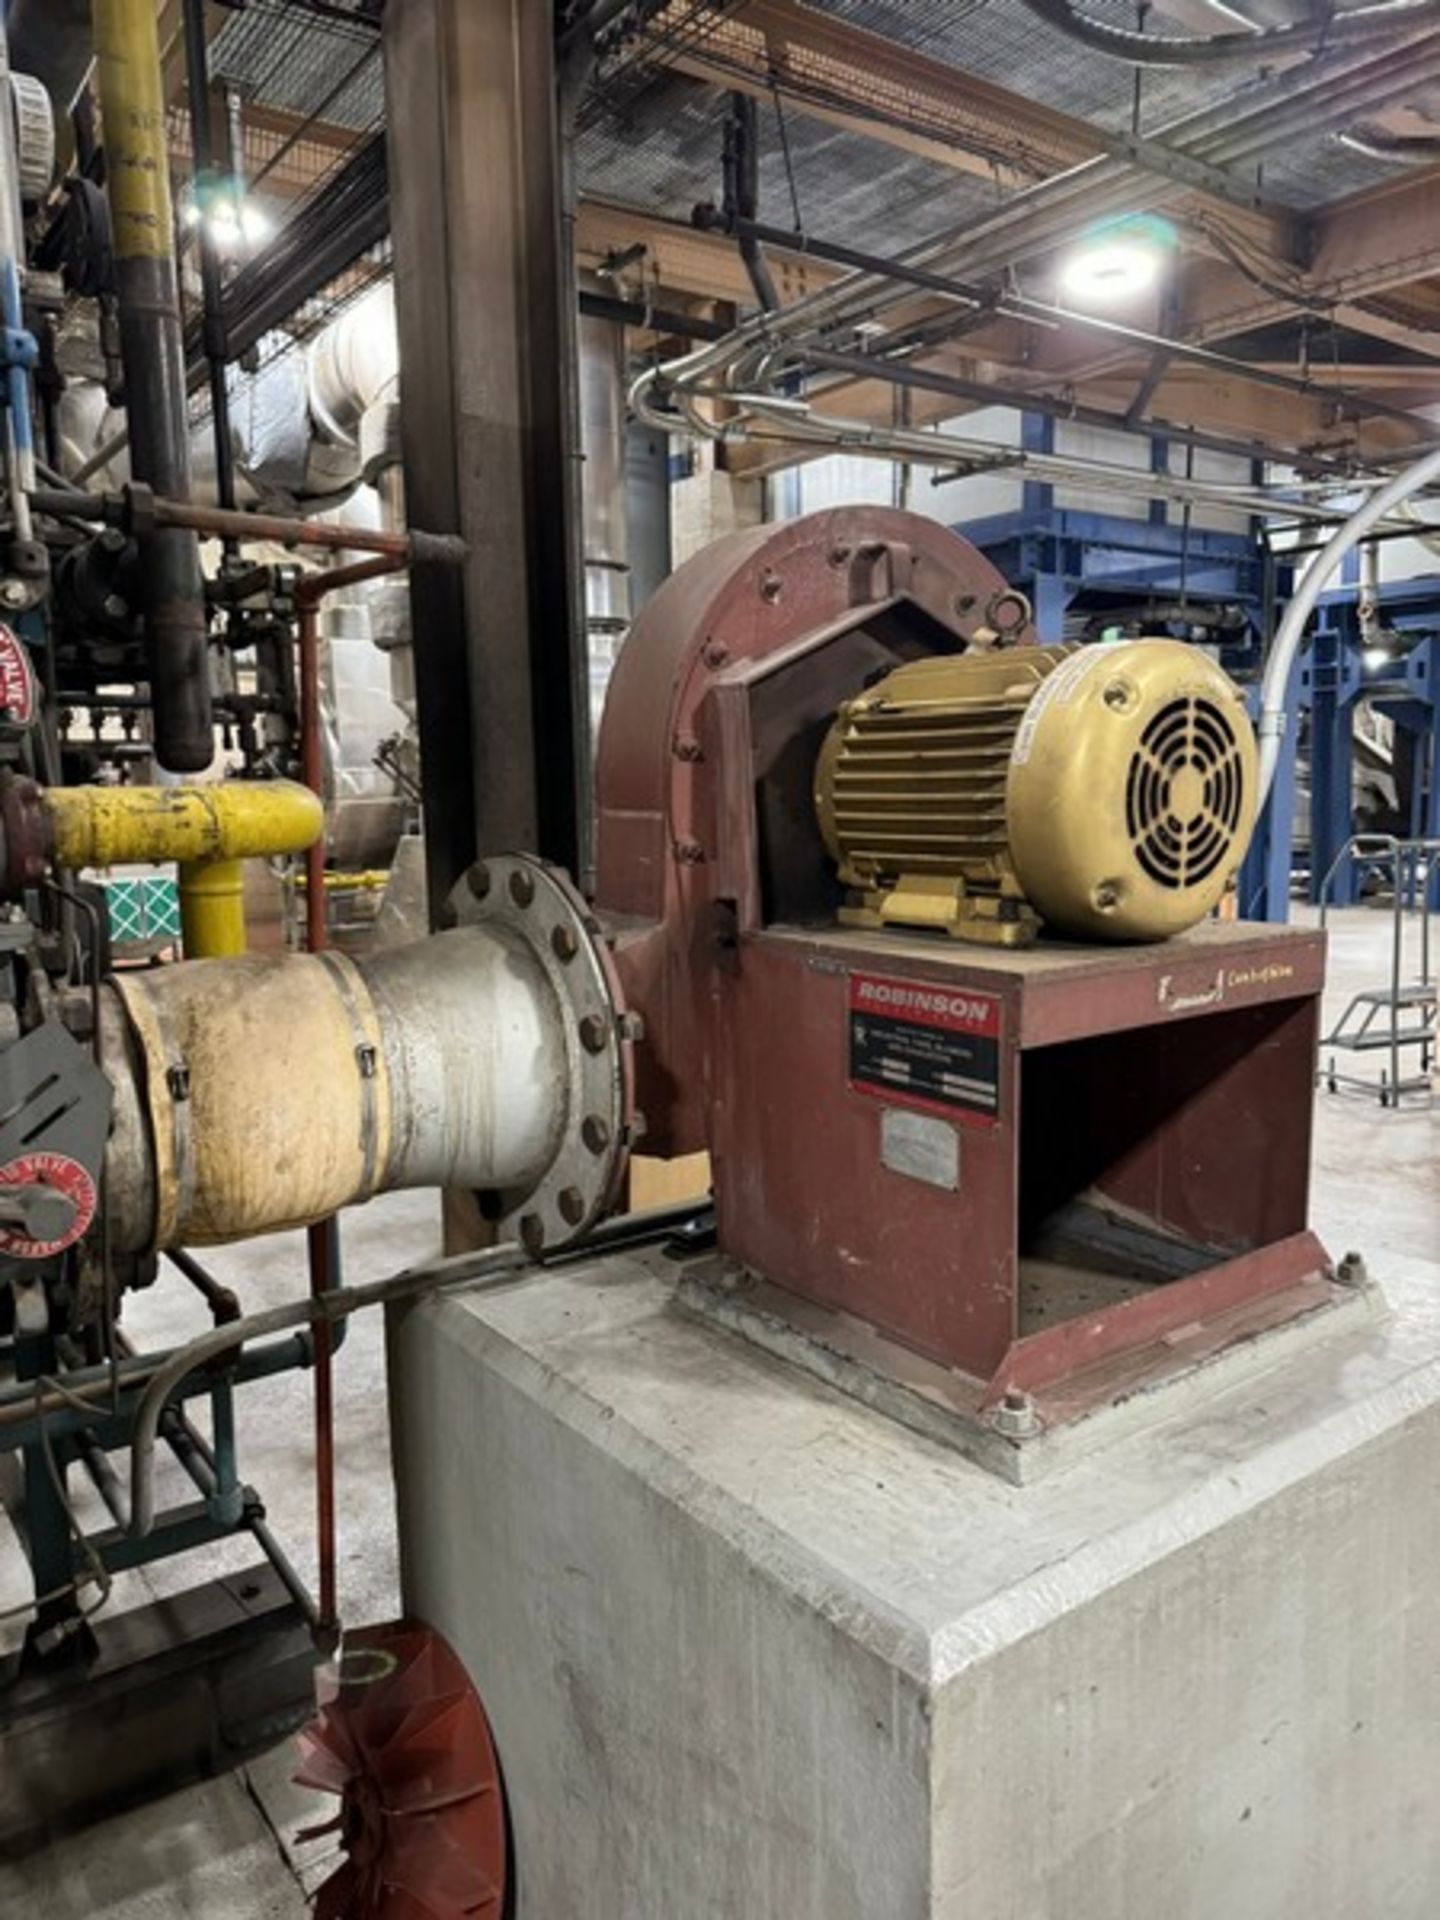 Process Combustion Corporation Air Heating System, S/N NDR-0189-12, with Associated Blowers, Duct - Image 5 of 10